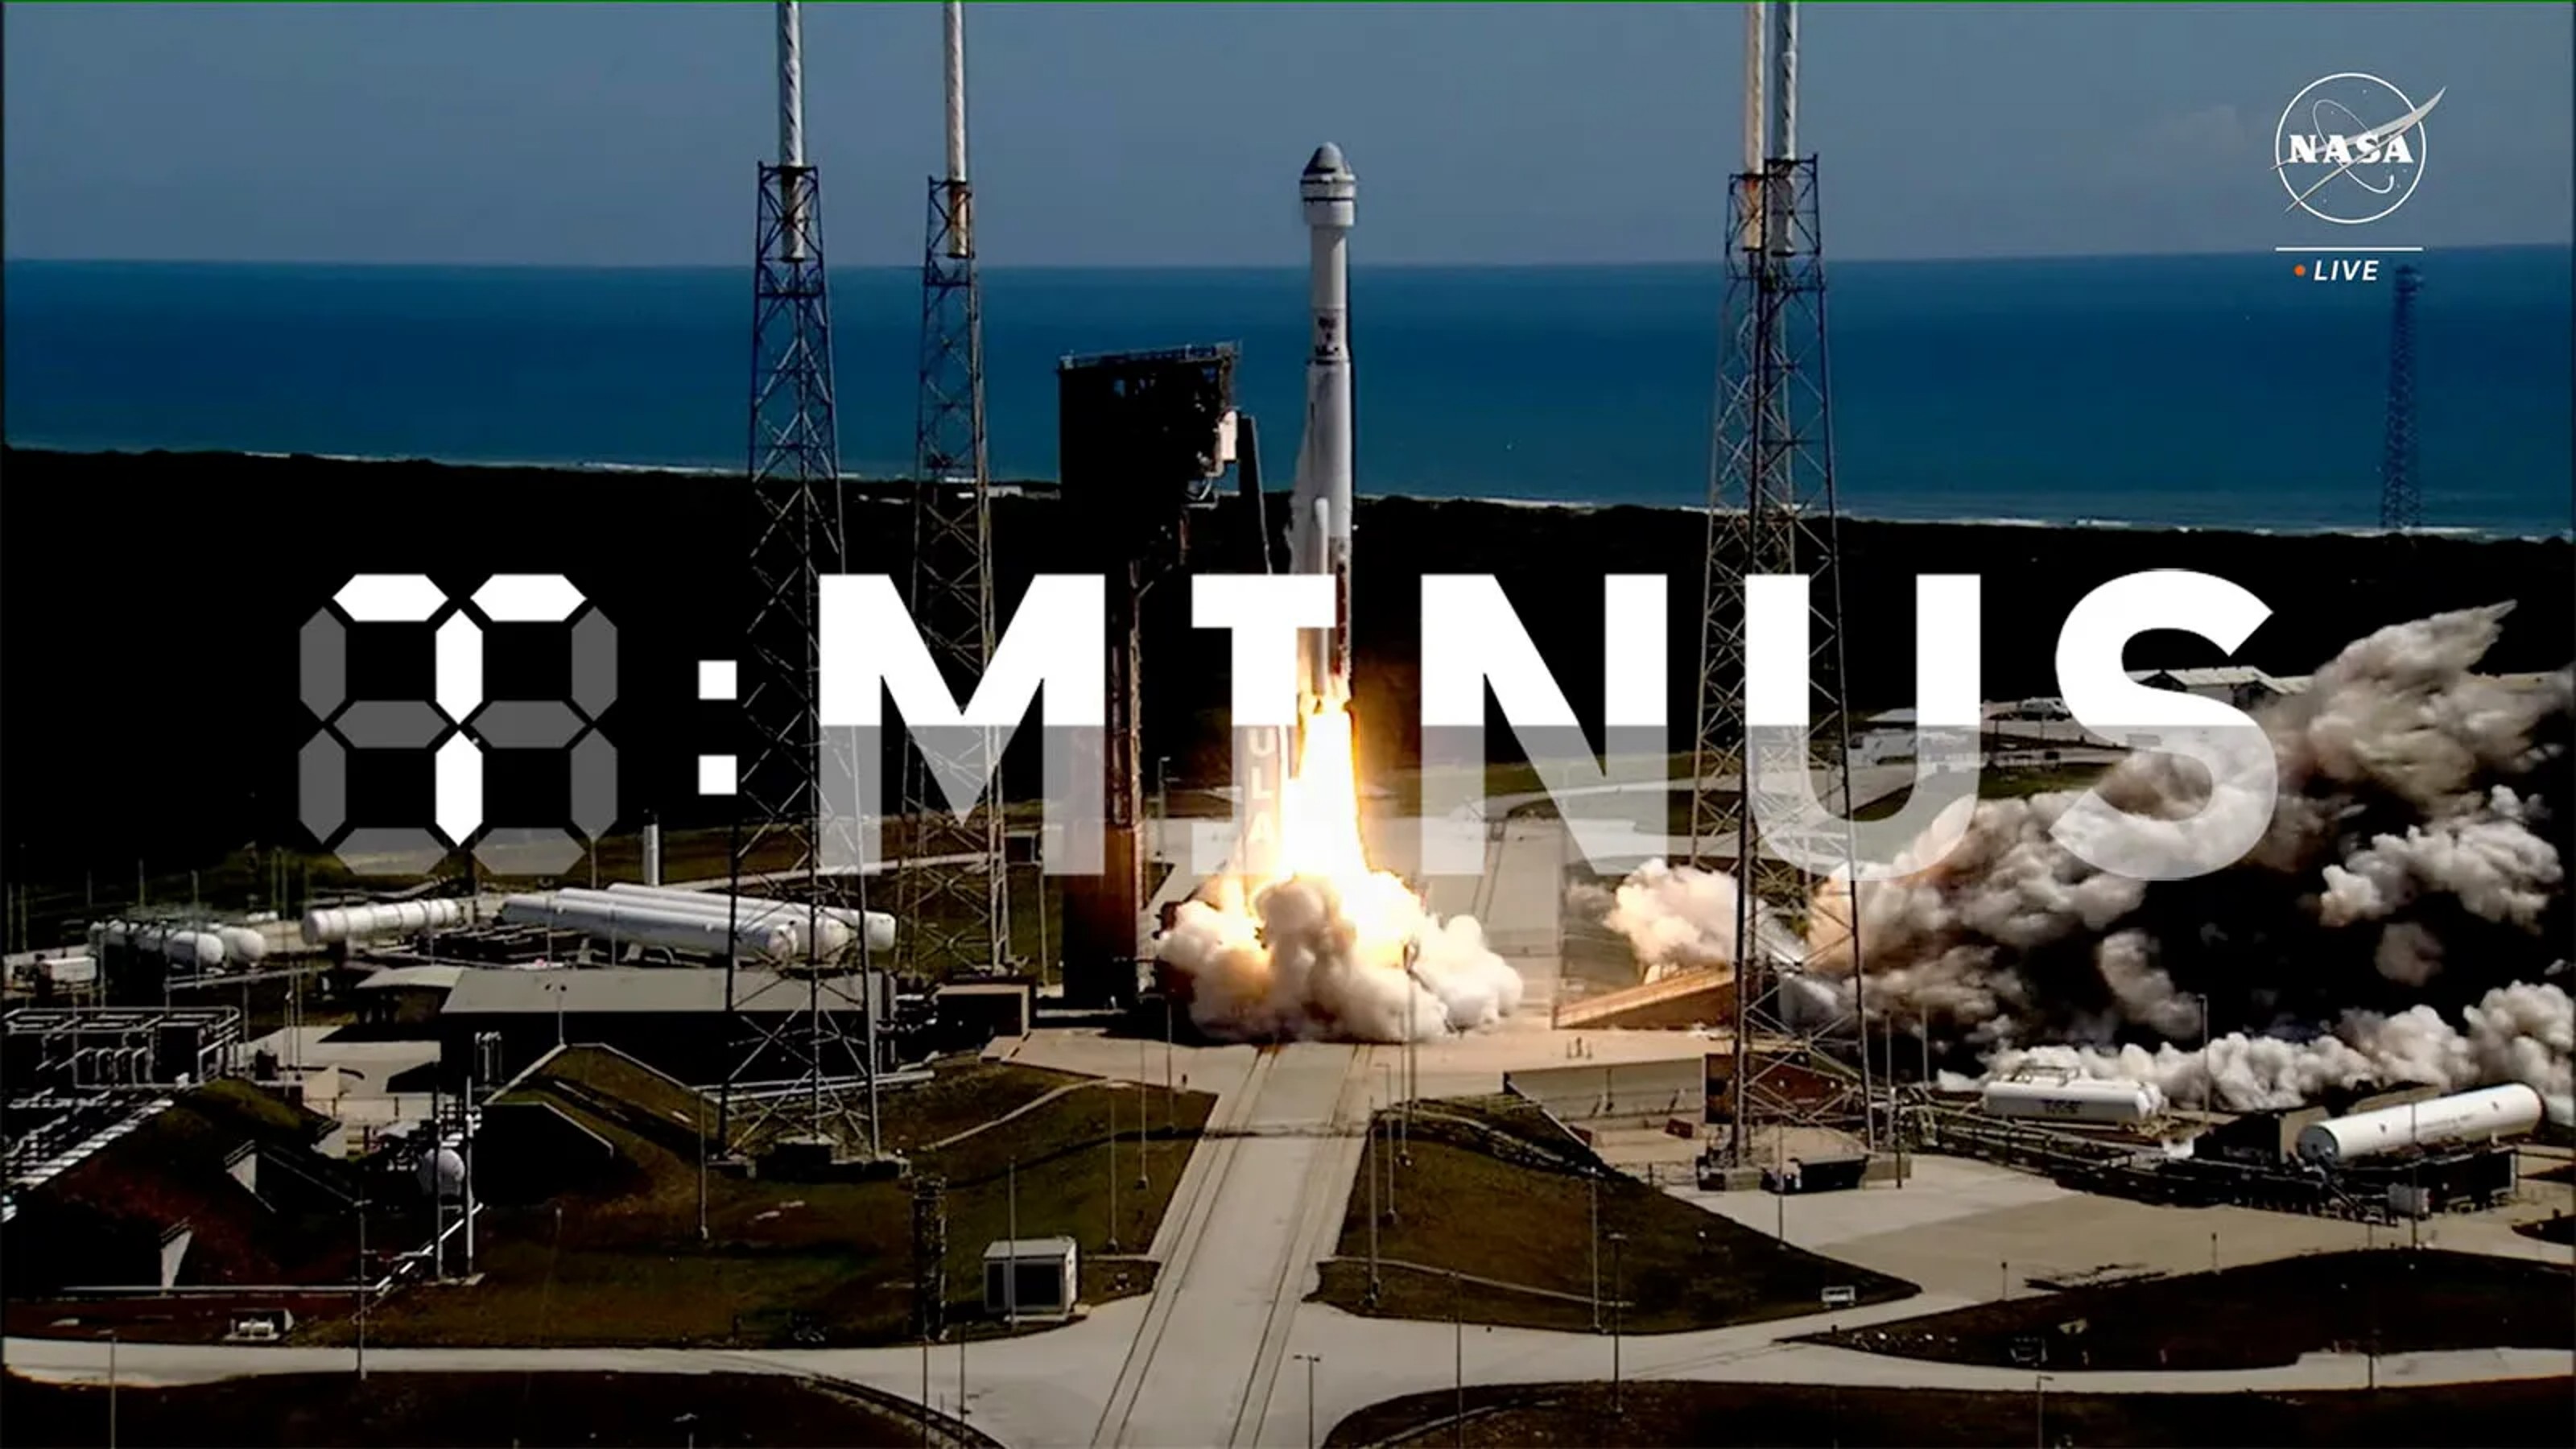 A rocket launches from a pad at a coastal space center with ocean in background. The word "TMNTUS" is overlaid in large letters.